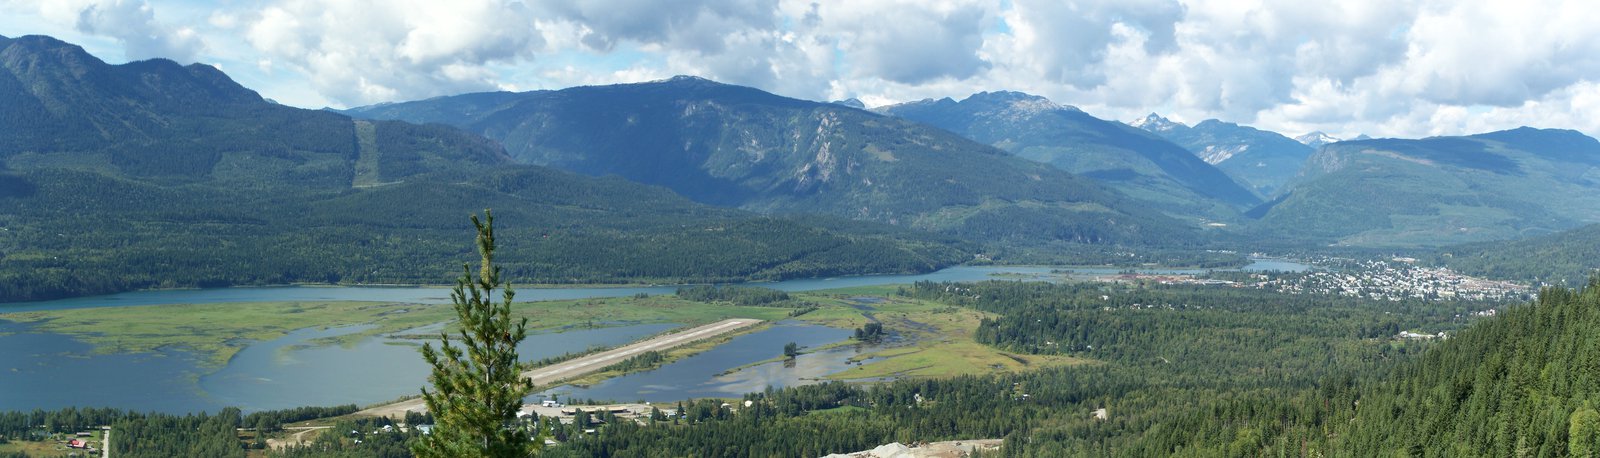 Revelstoke Airport and Town